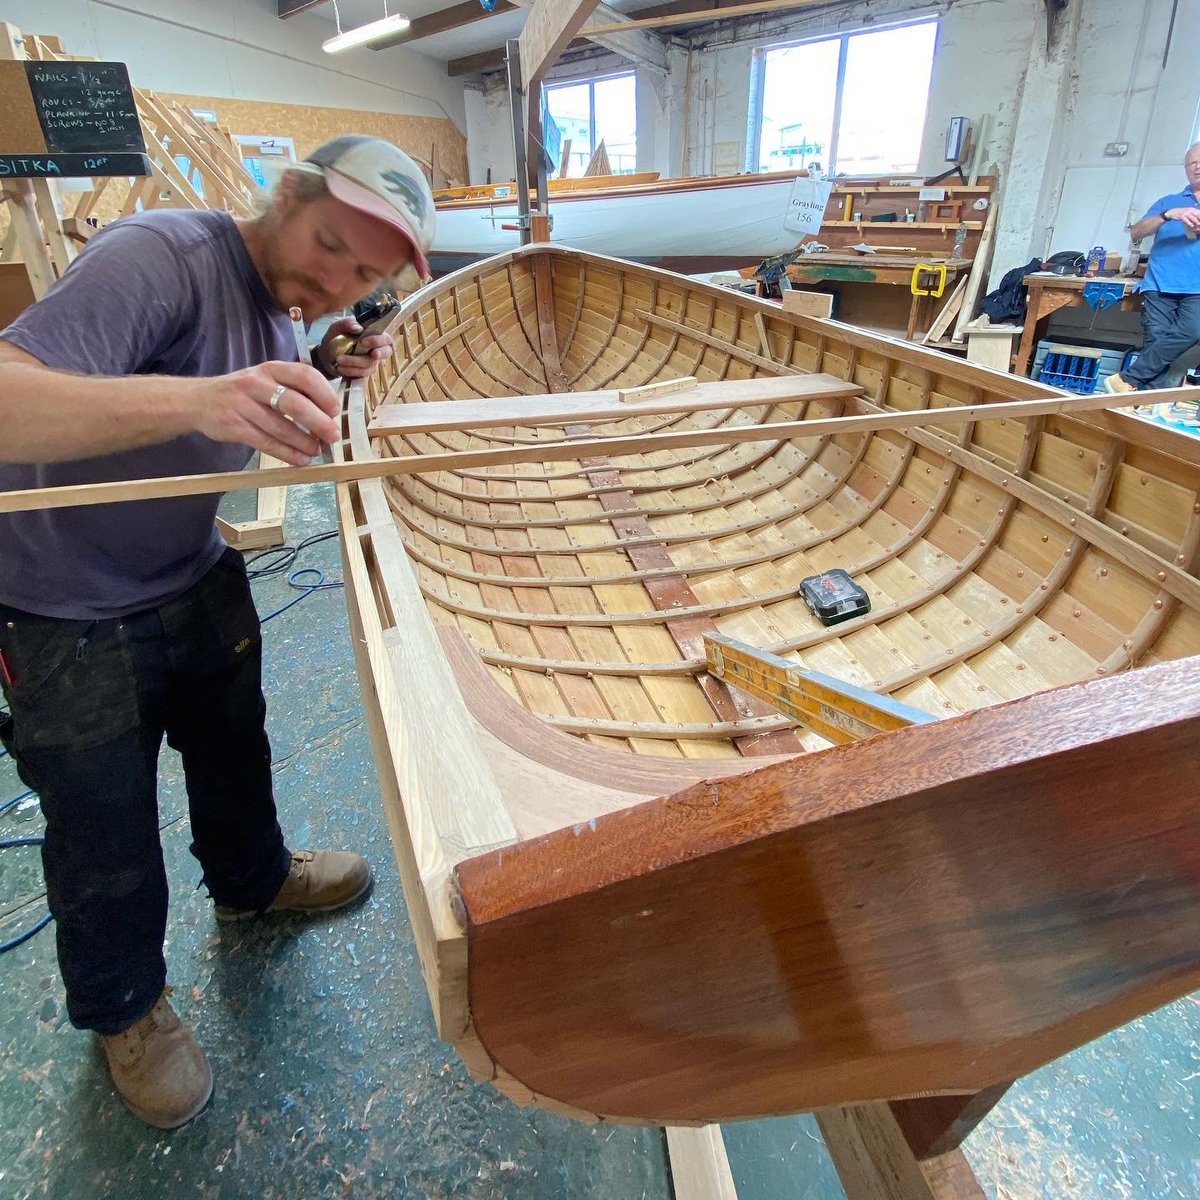 @heritage_crafts & the Wooden Boatbuilders' Trade Association are carrying out a survey of traditional wooden boat builders and skills in the UK. If you are a wooden boat builder or work with wooden boat builders, please take the survey (closes 31 Jan): heritagecrafts.org.uk/boatbuildingsu…